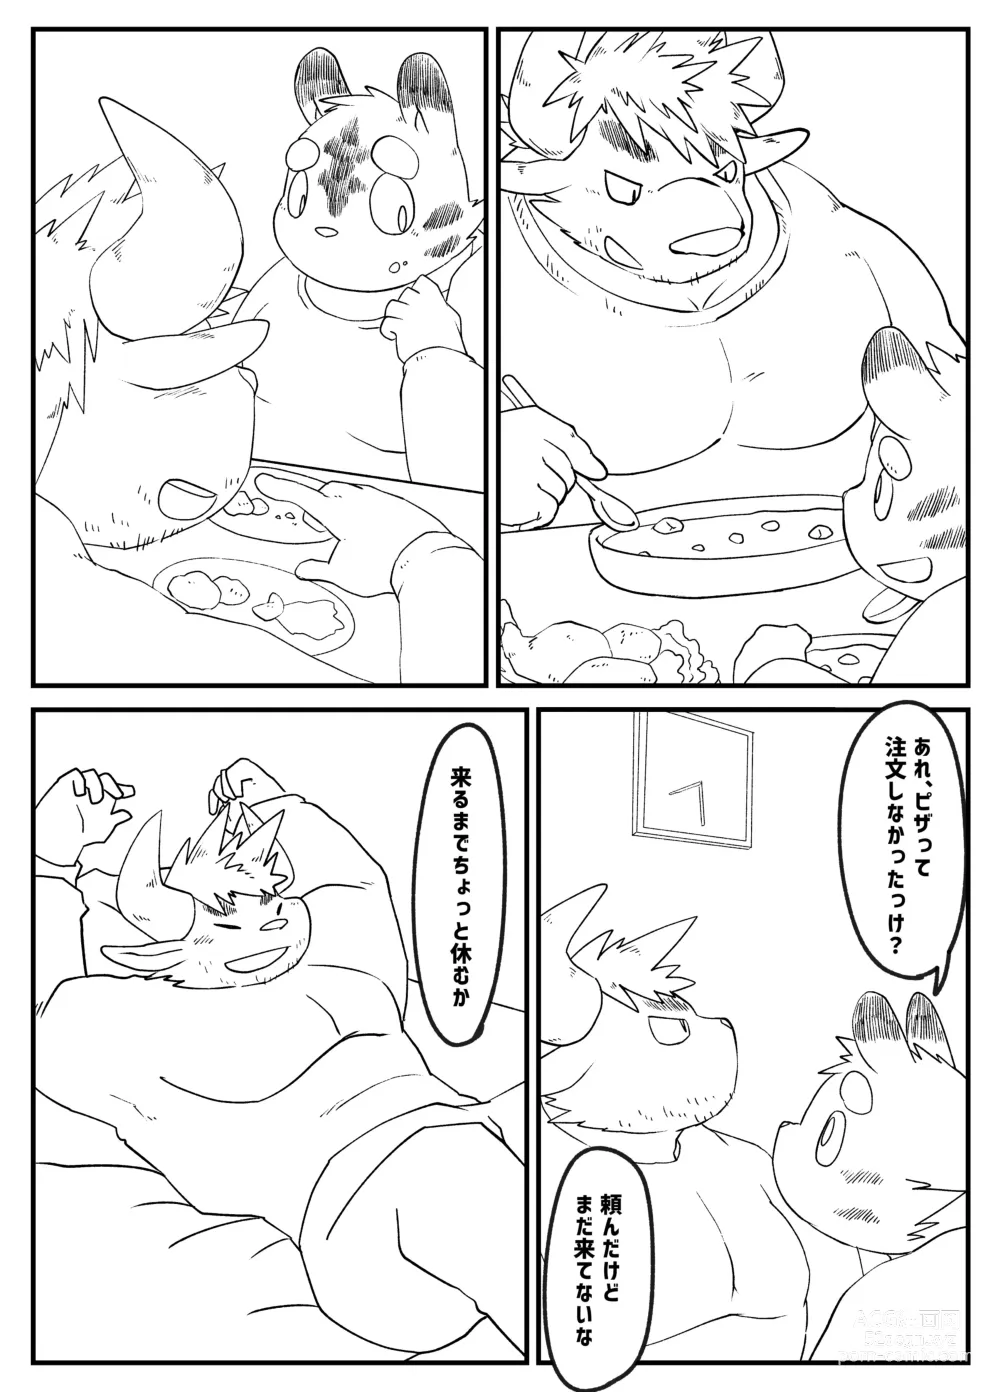 Page 3 of doujinshi Muscular Bull Teacher & Chubby Tiger Student 5